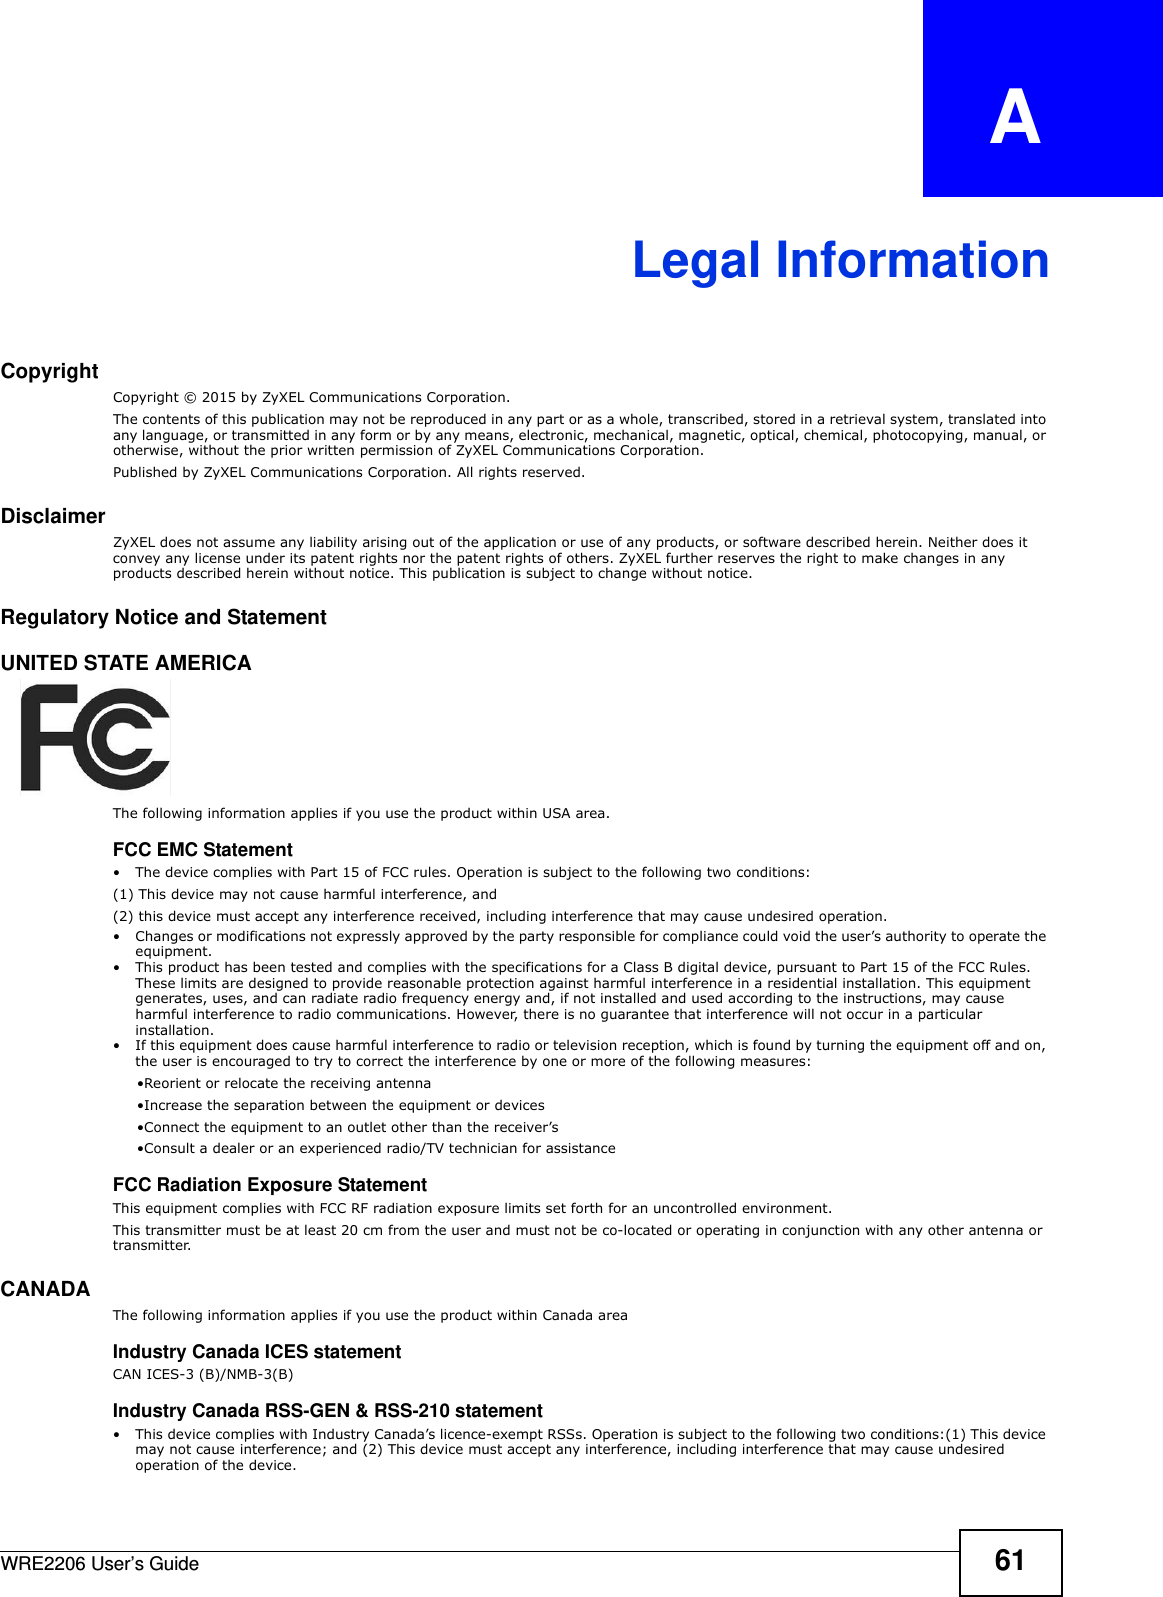 WRE2206 User’s Guide 61APPENDIX   ALegal InformationCopyrightCopyright © 2015 by ZyXEL Communications Corporation.The contents of this publication may not be reproduced in any part or as a whole, transcribed, stored in a retrieval system, translated into any language, or transmitted in any form or by any means, electronic, mechanical, magnetic, optical, chemical, photocopying, manual, or otherwise, without the prior written permission of ZyXEL Communications Corporation.Published by ZyXEL Communications Corporation. All rights reserved.DisclaimerZyXEL does not assume any liability arising out of the application or use of any products, or software described herein. Neither does it convey any license under its patent rights nor the patent rights of others. ZyXEL further reserves the right to make changes in any products described herein without notice. This publication is subject to change without notice.Regulatory Notice and StatementUNITED STATE AMERICAThe following information applies if you use the product within USA area.FCC EMC Statement• The device complies with Part 15 of FCC rules. Operation is subject to the following two conditions:(1) This device may not cause harmful interference, and (2) this device must accept any interference received, including interference that may cause undesired operation.• Changes or modifications not expressly approved by the party responsible for compliance could void the user’s authority to operate the equipment.• This product has been tested and complies with the specifications for a Class B digital device, pursuant to Part 15 of the FCC Rules. These limits are designed to provide reasonable protection against harmful interference in a residential installation. This equipment generates, uses, and can radiate radio frequency energy and, if not installed and used according to the instructions, may cause harmful interference to radio communications. However, there is no guarantee that interference will not occur in a particular installation. • If this equipment does cause harmful interference to radio or television reception, which is found by turning the equipment off and on, the user is encouraged to try to correct the interference by one or more of the following measures:     •Reorient or relocate the receiving antenna      •Increase the separation between the equipment or devices      •Connect the equipment to an outlet other than the receiver’s      •Consult a dealer or an experienced radio/TV technician for assistanceFCC Radiation Exposure StatementThis equipment complies with FCC RF radiation exposure limits set forth for an uncontrolled environment. This transmitter must be at least 20 cm from the user and must not be co-located or operating in conjunction with any other antenna or transmitter.CANADA  The following information applies if you use the product within Canada areaIndustry Canada ICES statementCAN ICES-3 (B)/NMB-3(B)Industry Canada RSS-GEN &amp; RSS-210 statement• This device complies with Industry Canada’s licence-exempt RSSs. Operation is subject to the following two conditions:(1) This device may not cause interference; and (2) This device must accept any interference, including interference that may cause undesired operation of the device. 